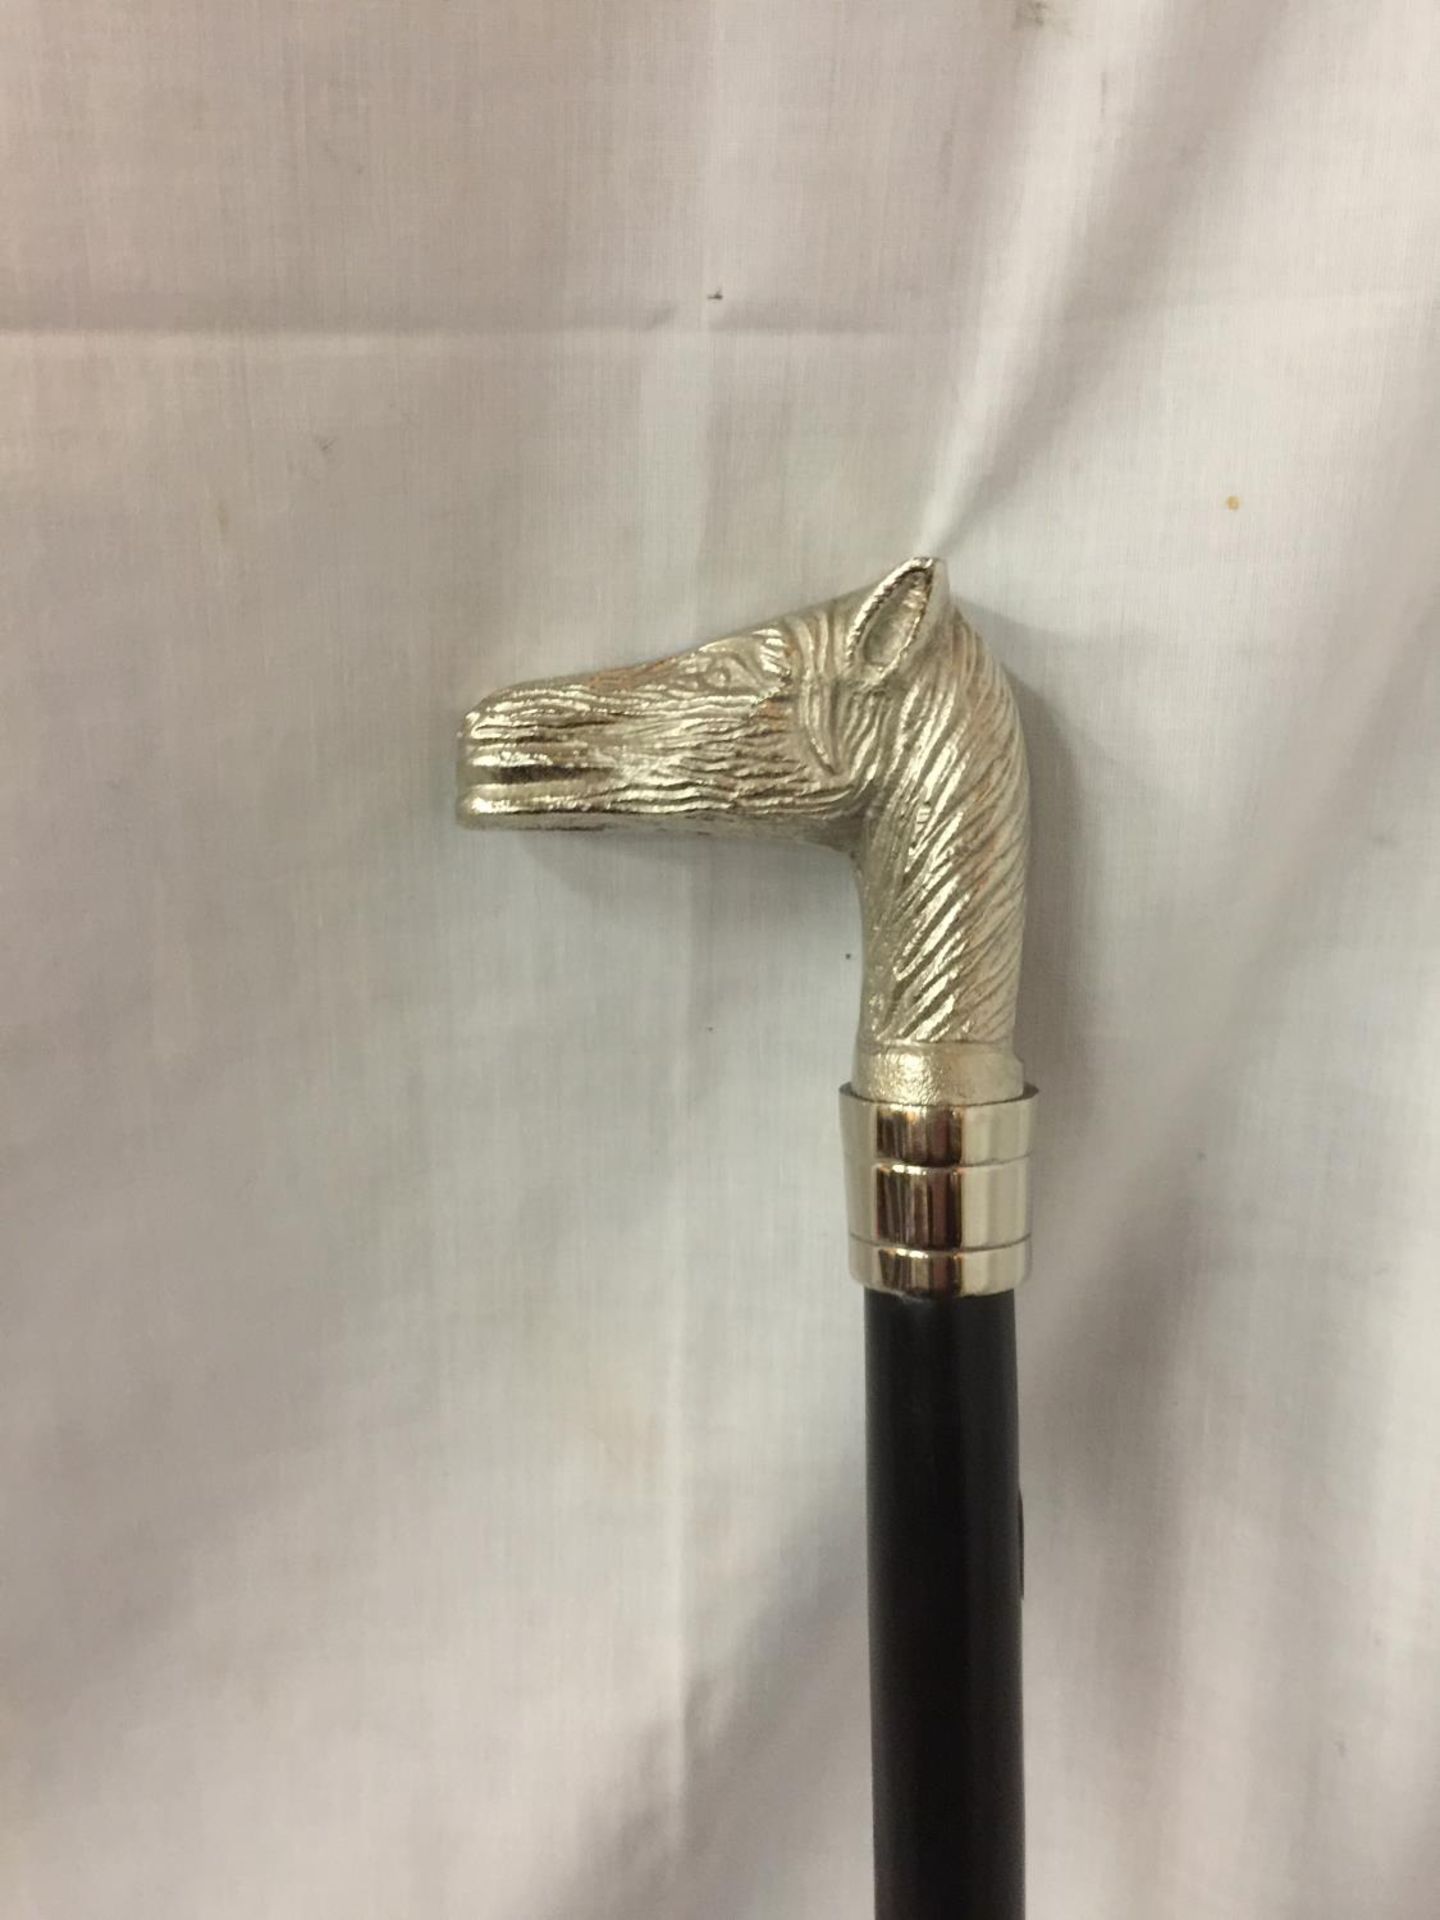 A WALKING CANE WITH A SILVER COLOURED HORSES HEAD TOP - Image 2 of 2